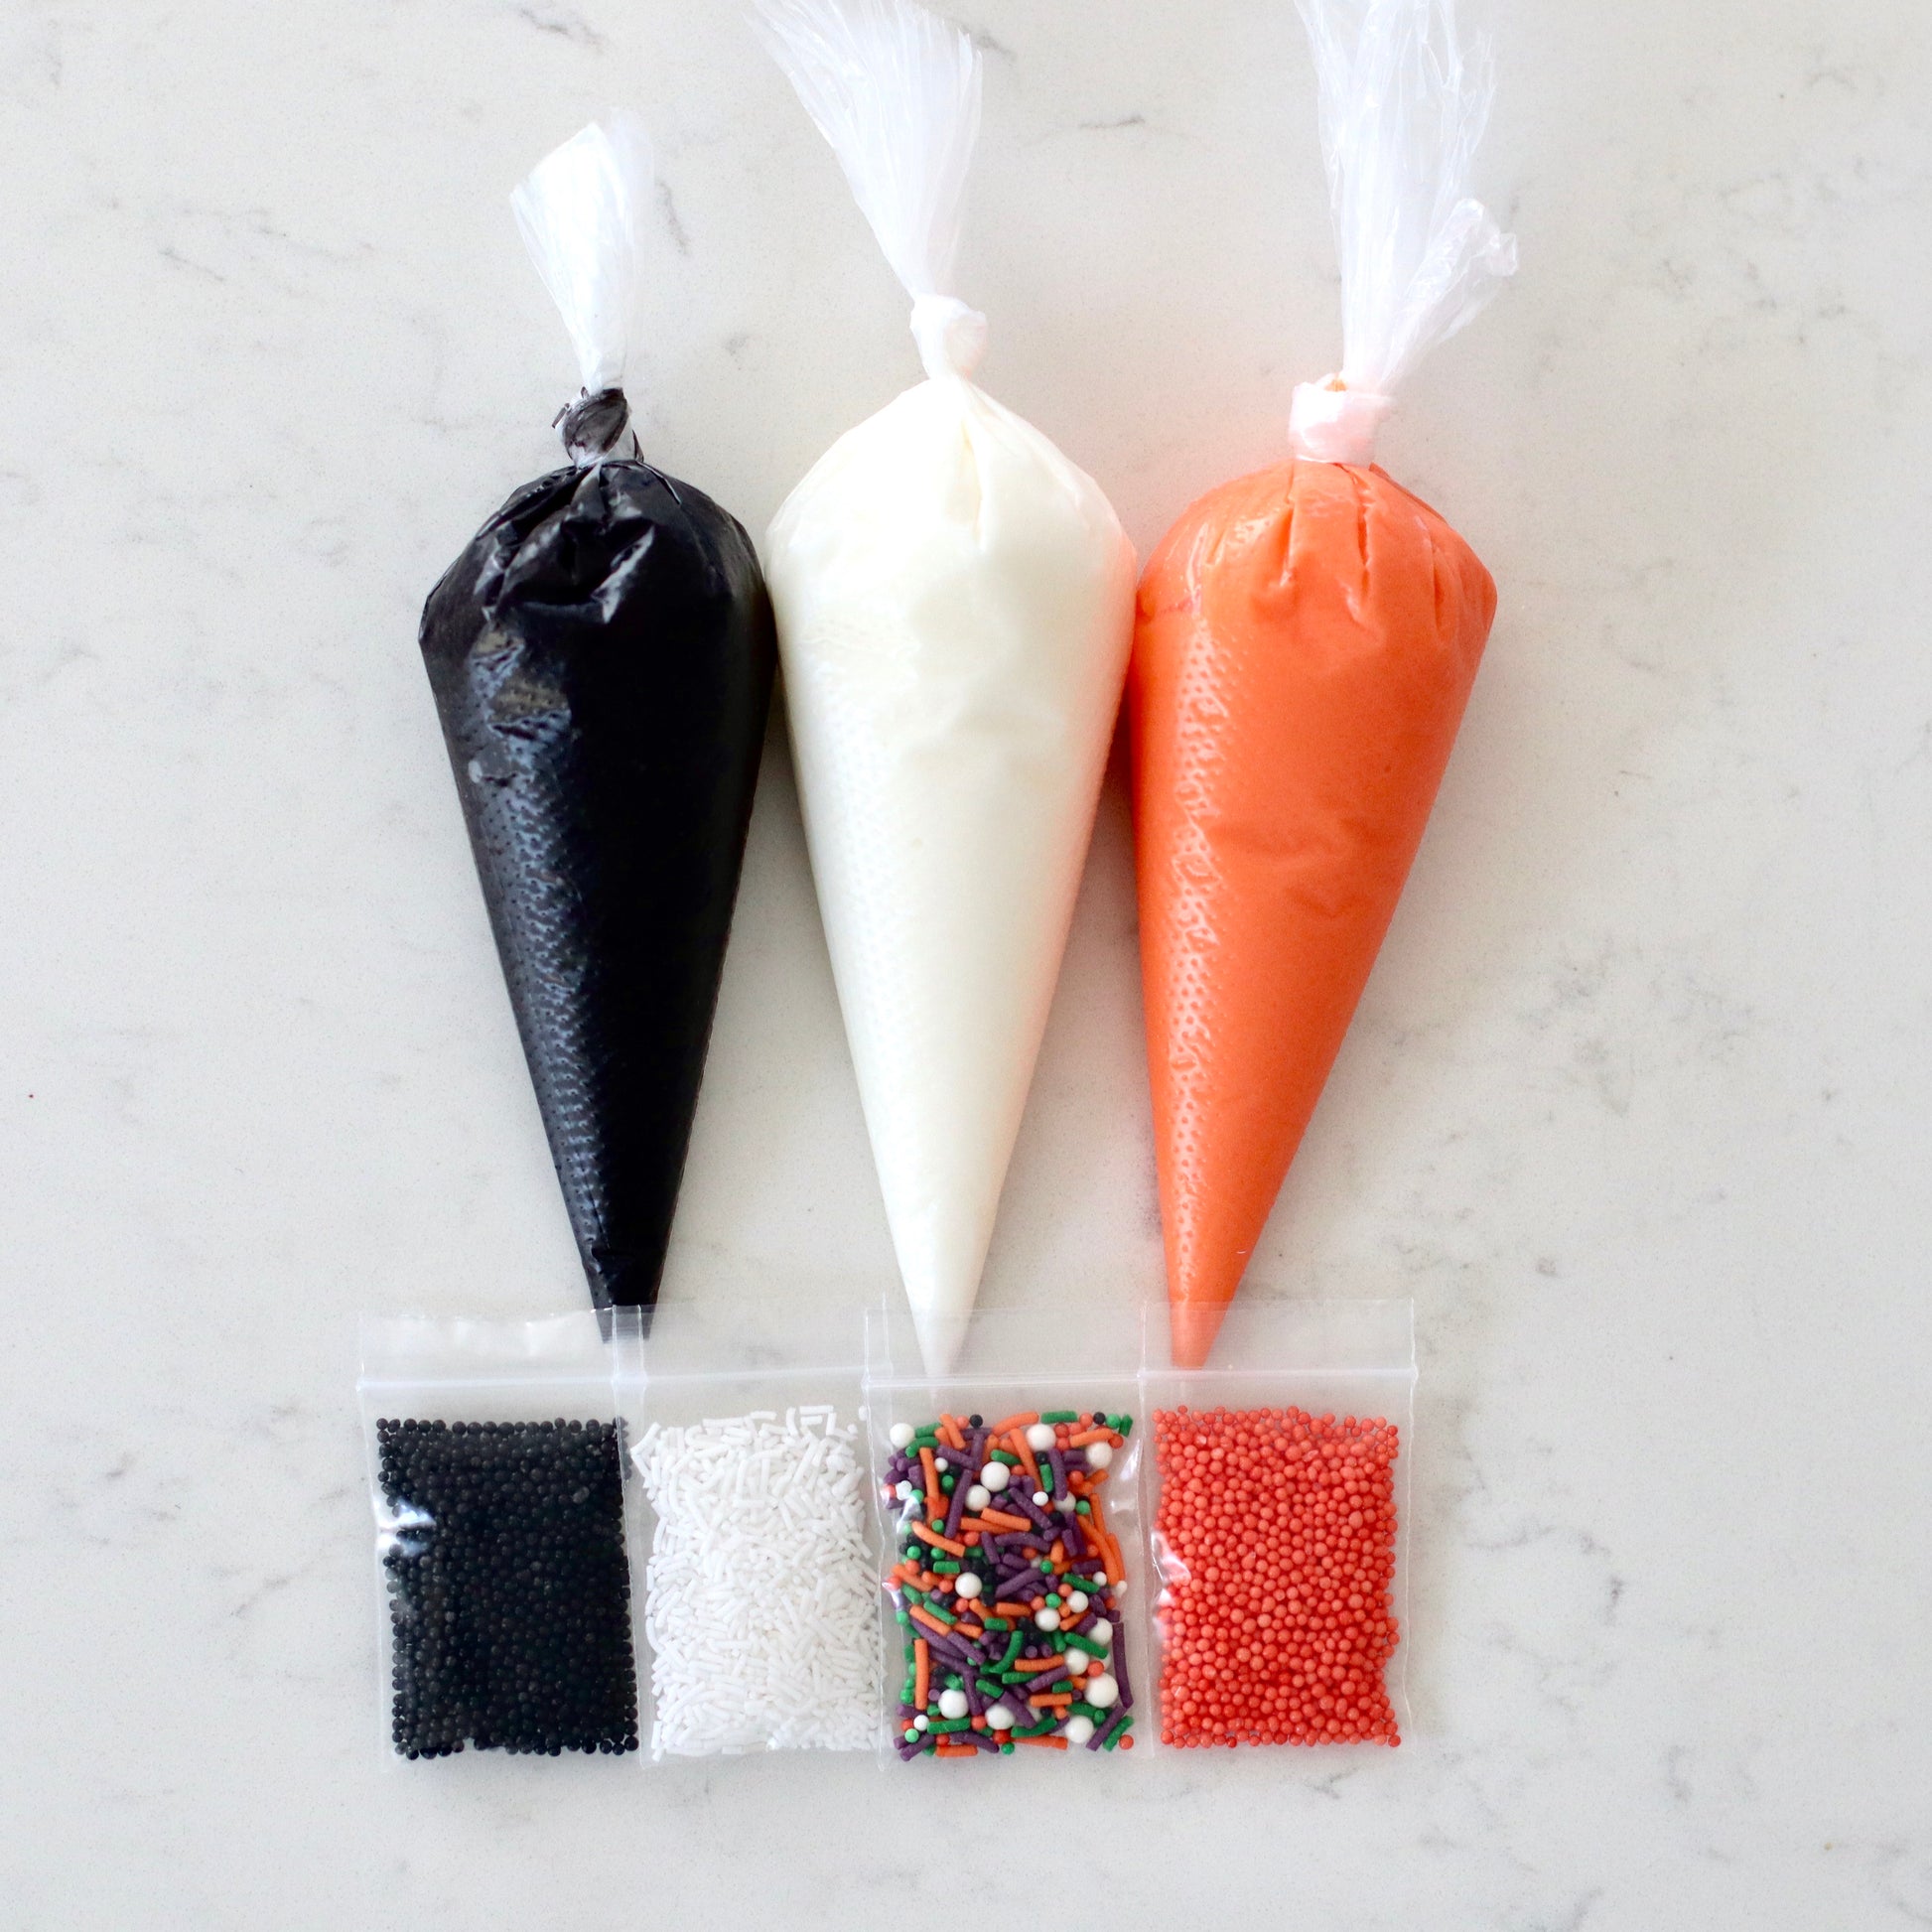 DIY cookie kit, includes everything you need to make your own gorgeous Halloween cookies.